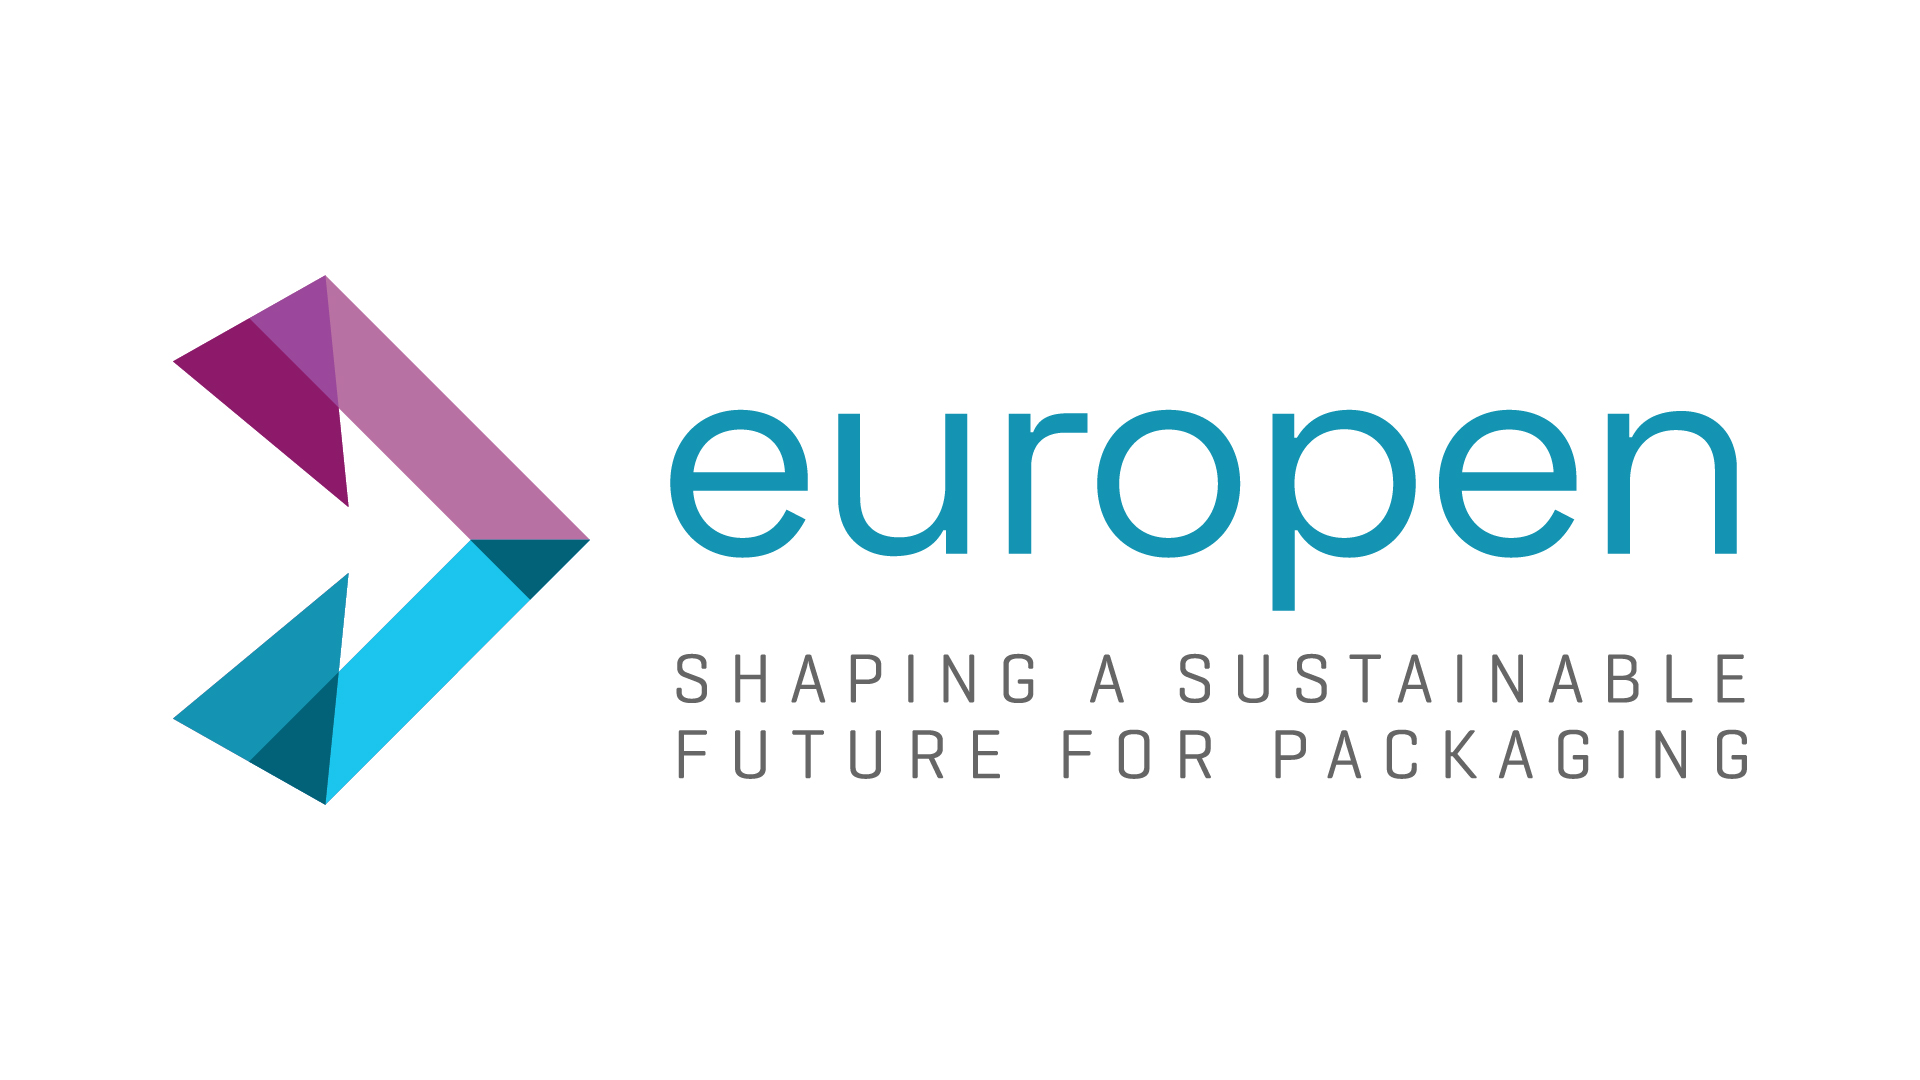 EUROPEN - The European Organization for Packaging and the Environment